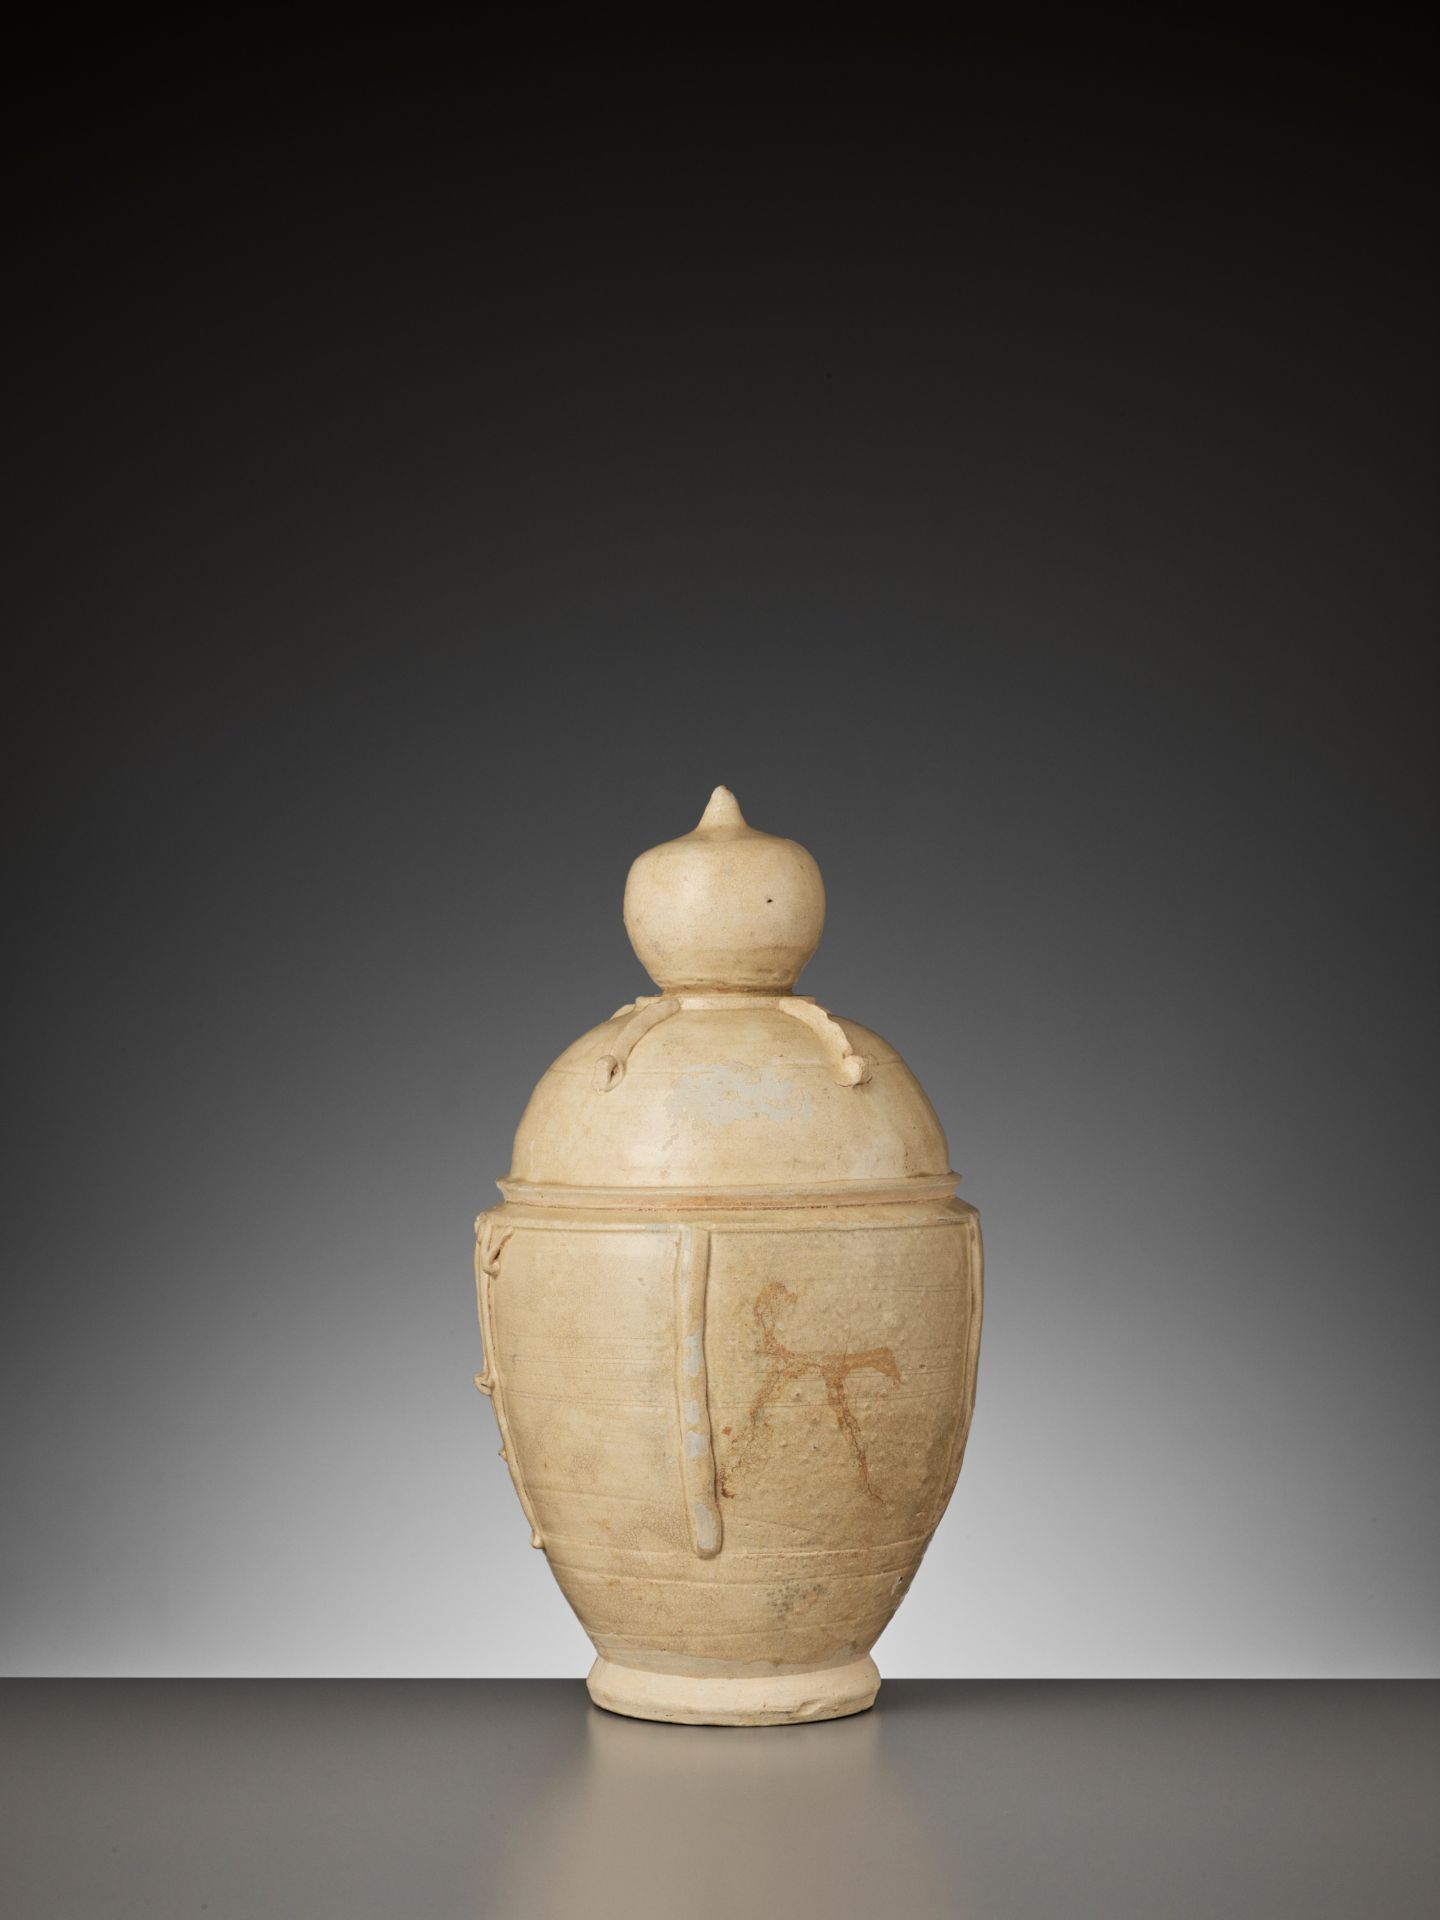 A RARE QINGBAI 'GRANARY' VESSEL, SOUTHERN SONG TO YUAN DYNASTY - Image 2 of 8